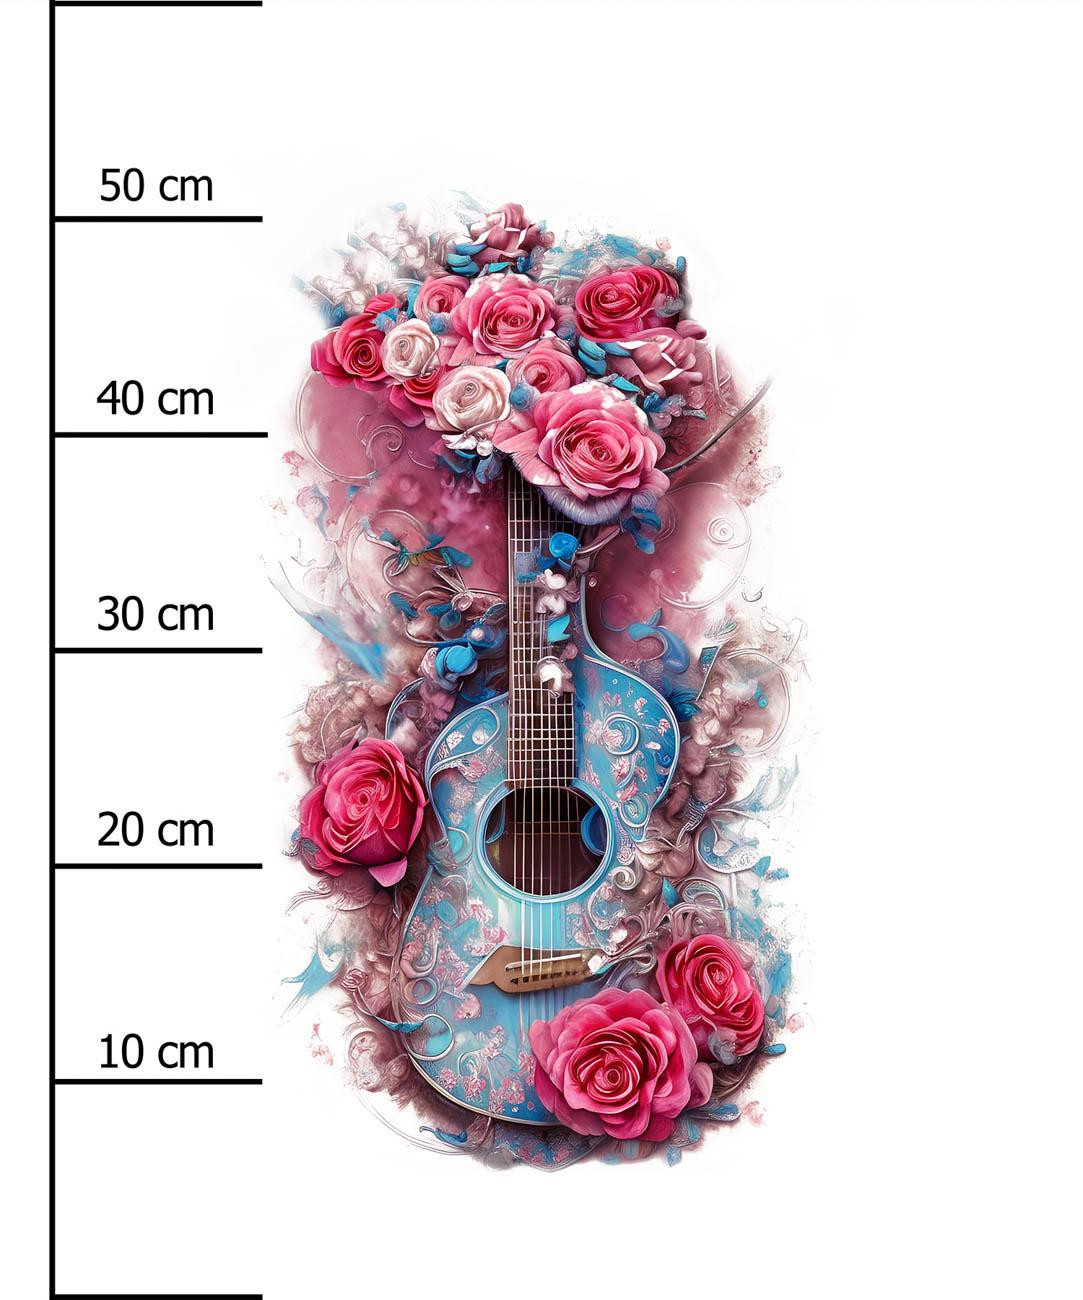 GUITAR WITH ROSES - panel (60cm x 50cm)